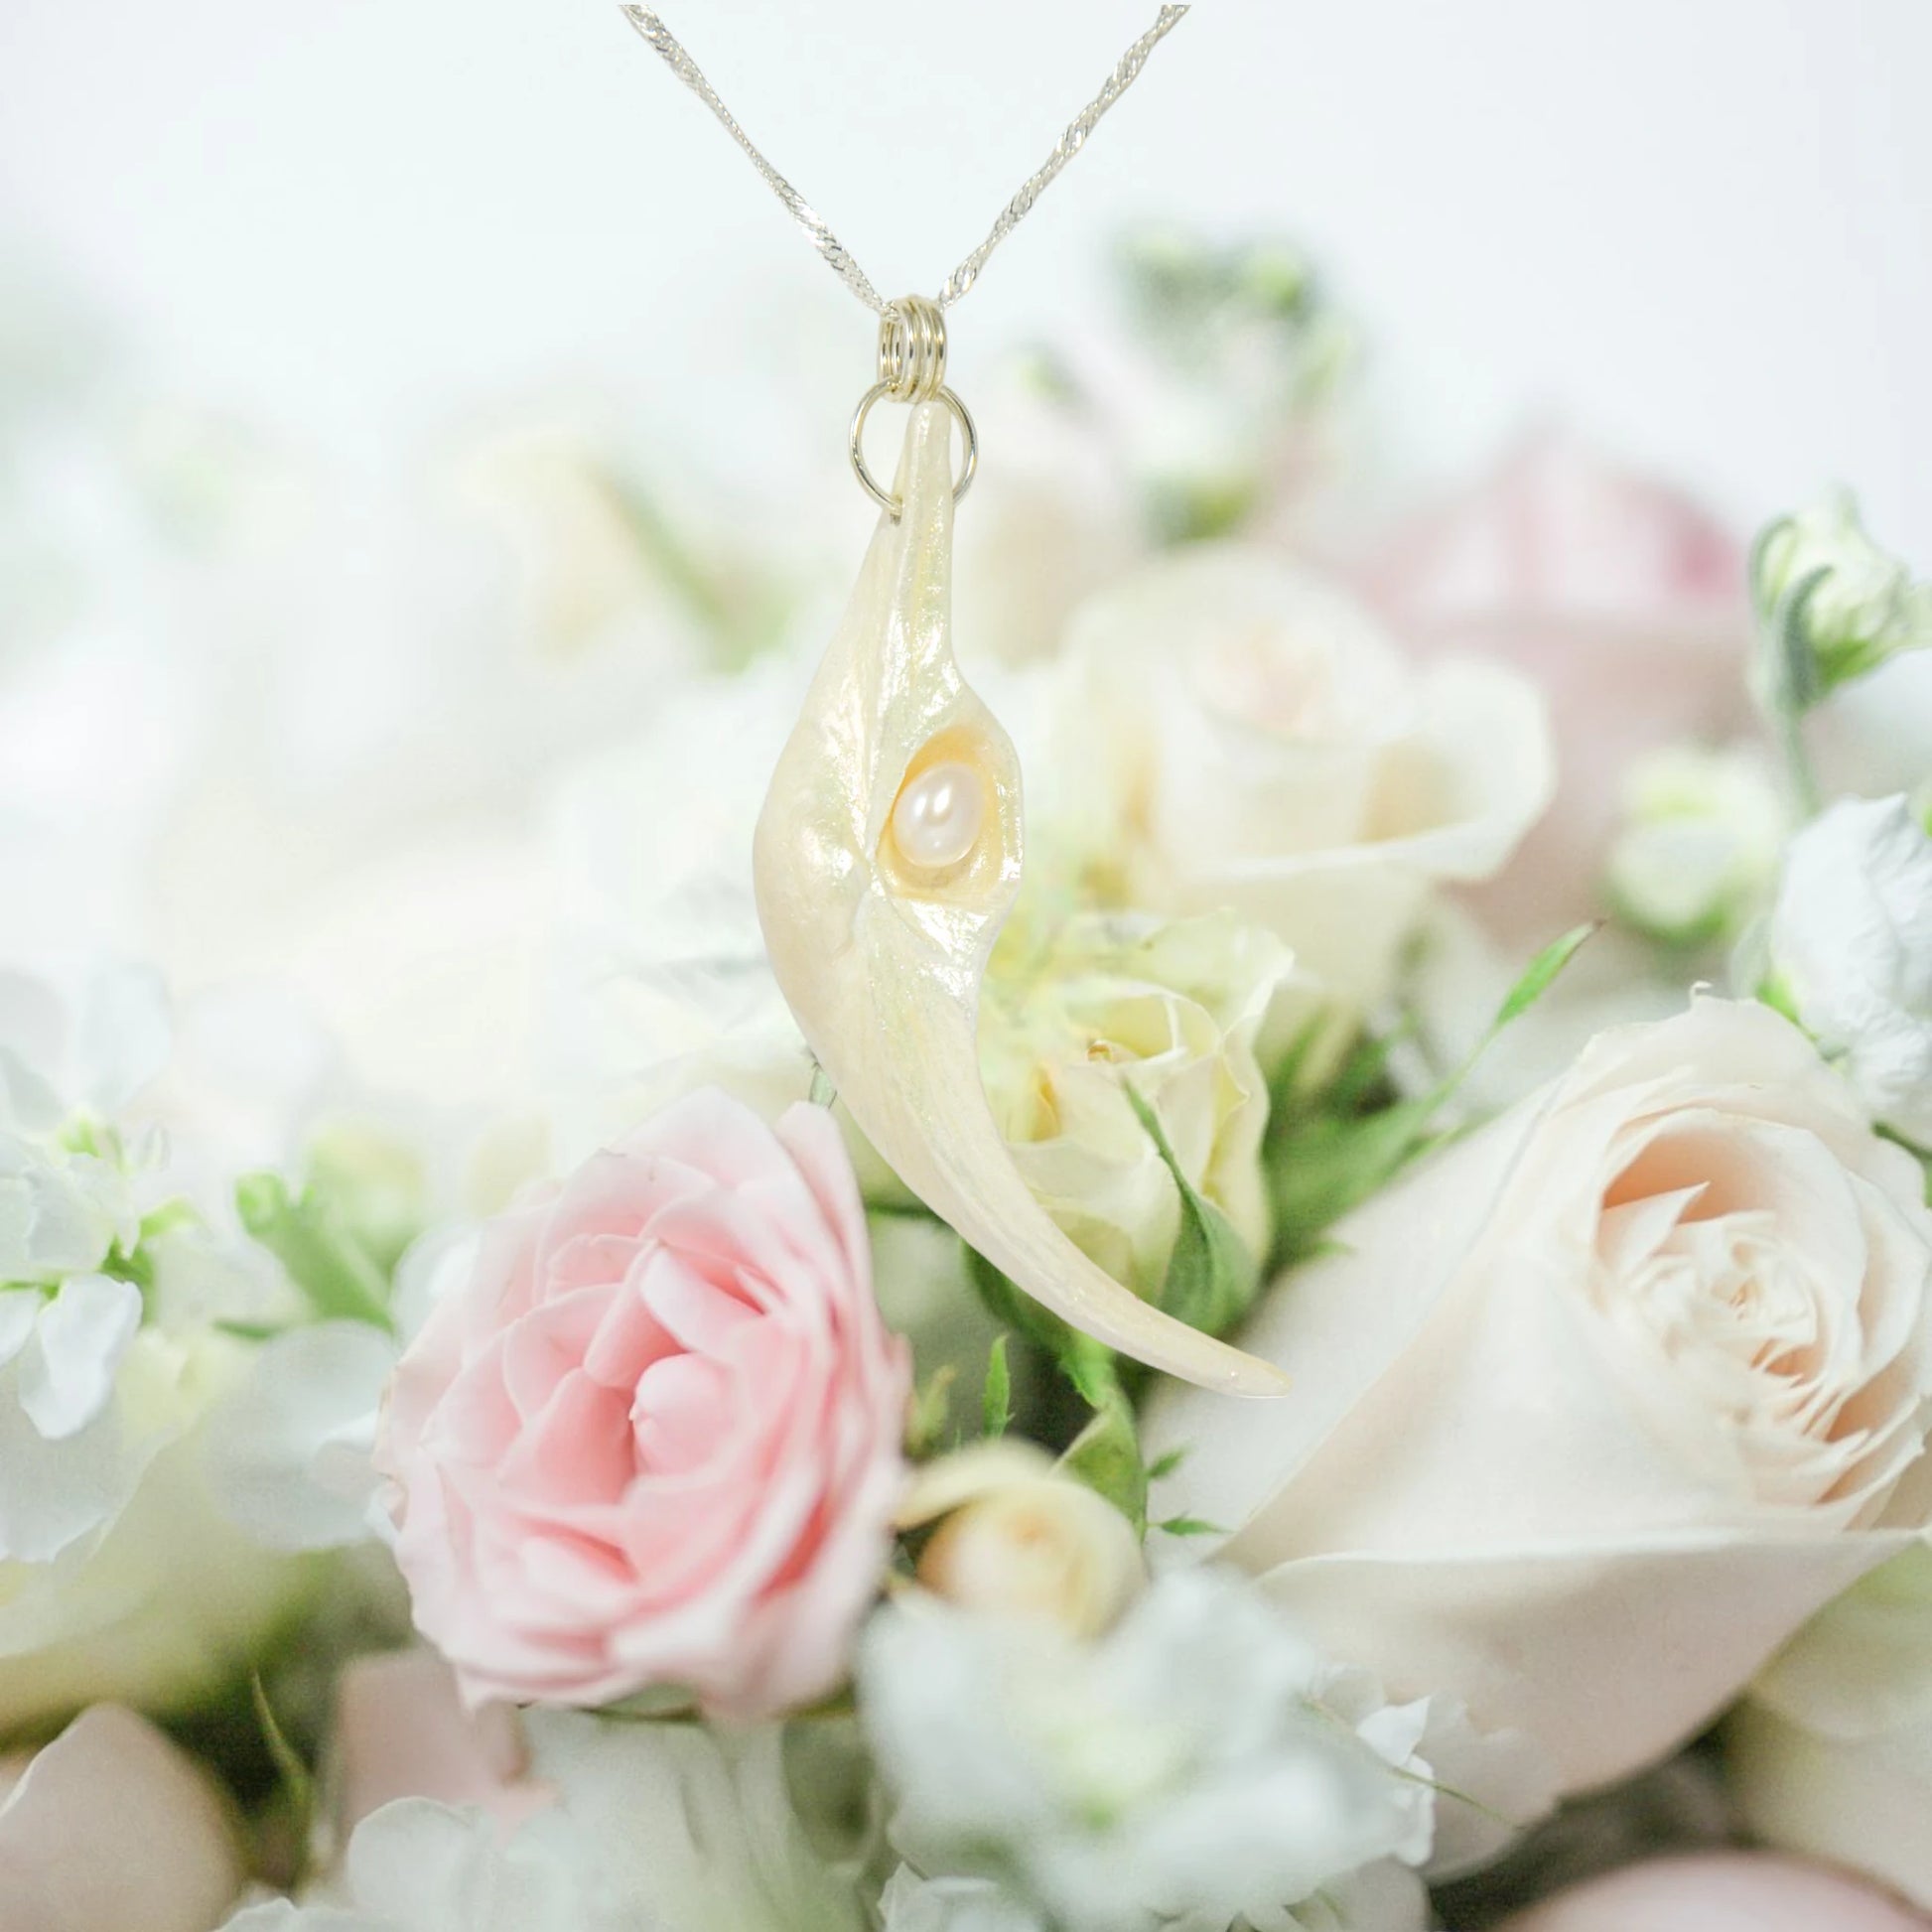 Jupiter is a natural seashell pendant with a real freshwater pearl. The pendant is shown hanging over a bouquet of pink and white roses.